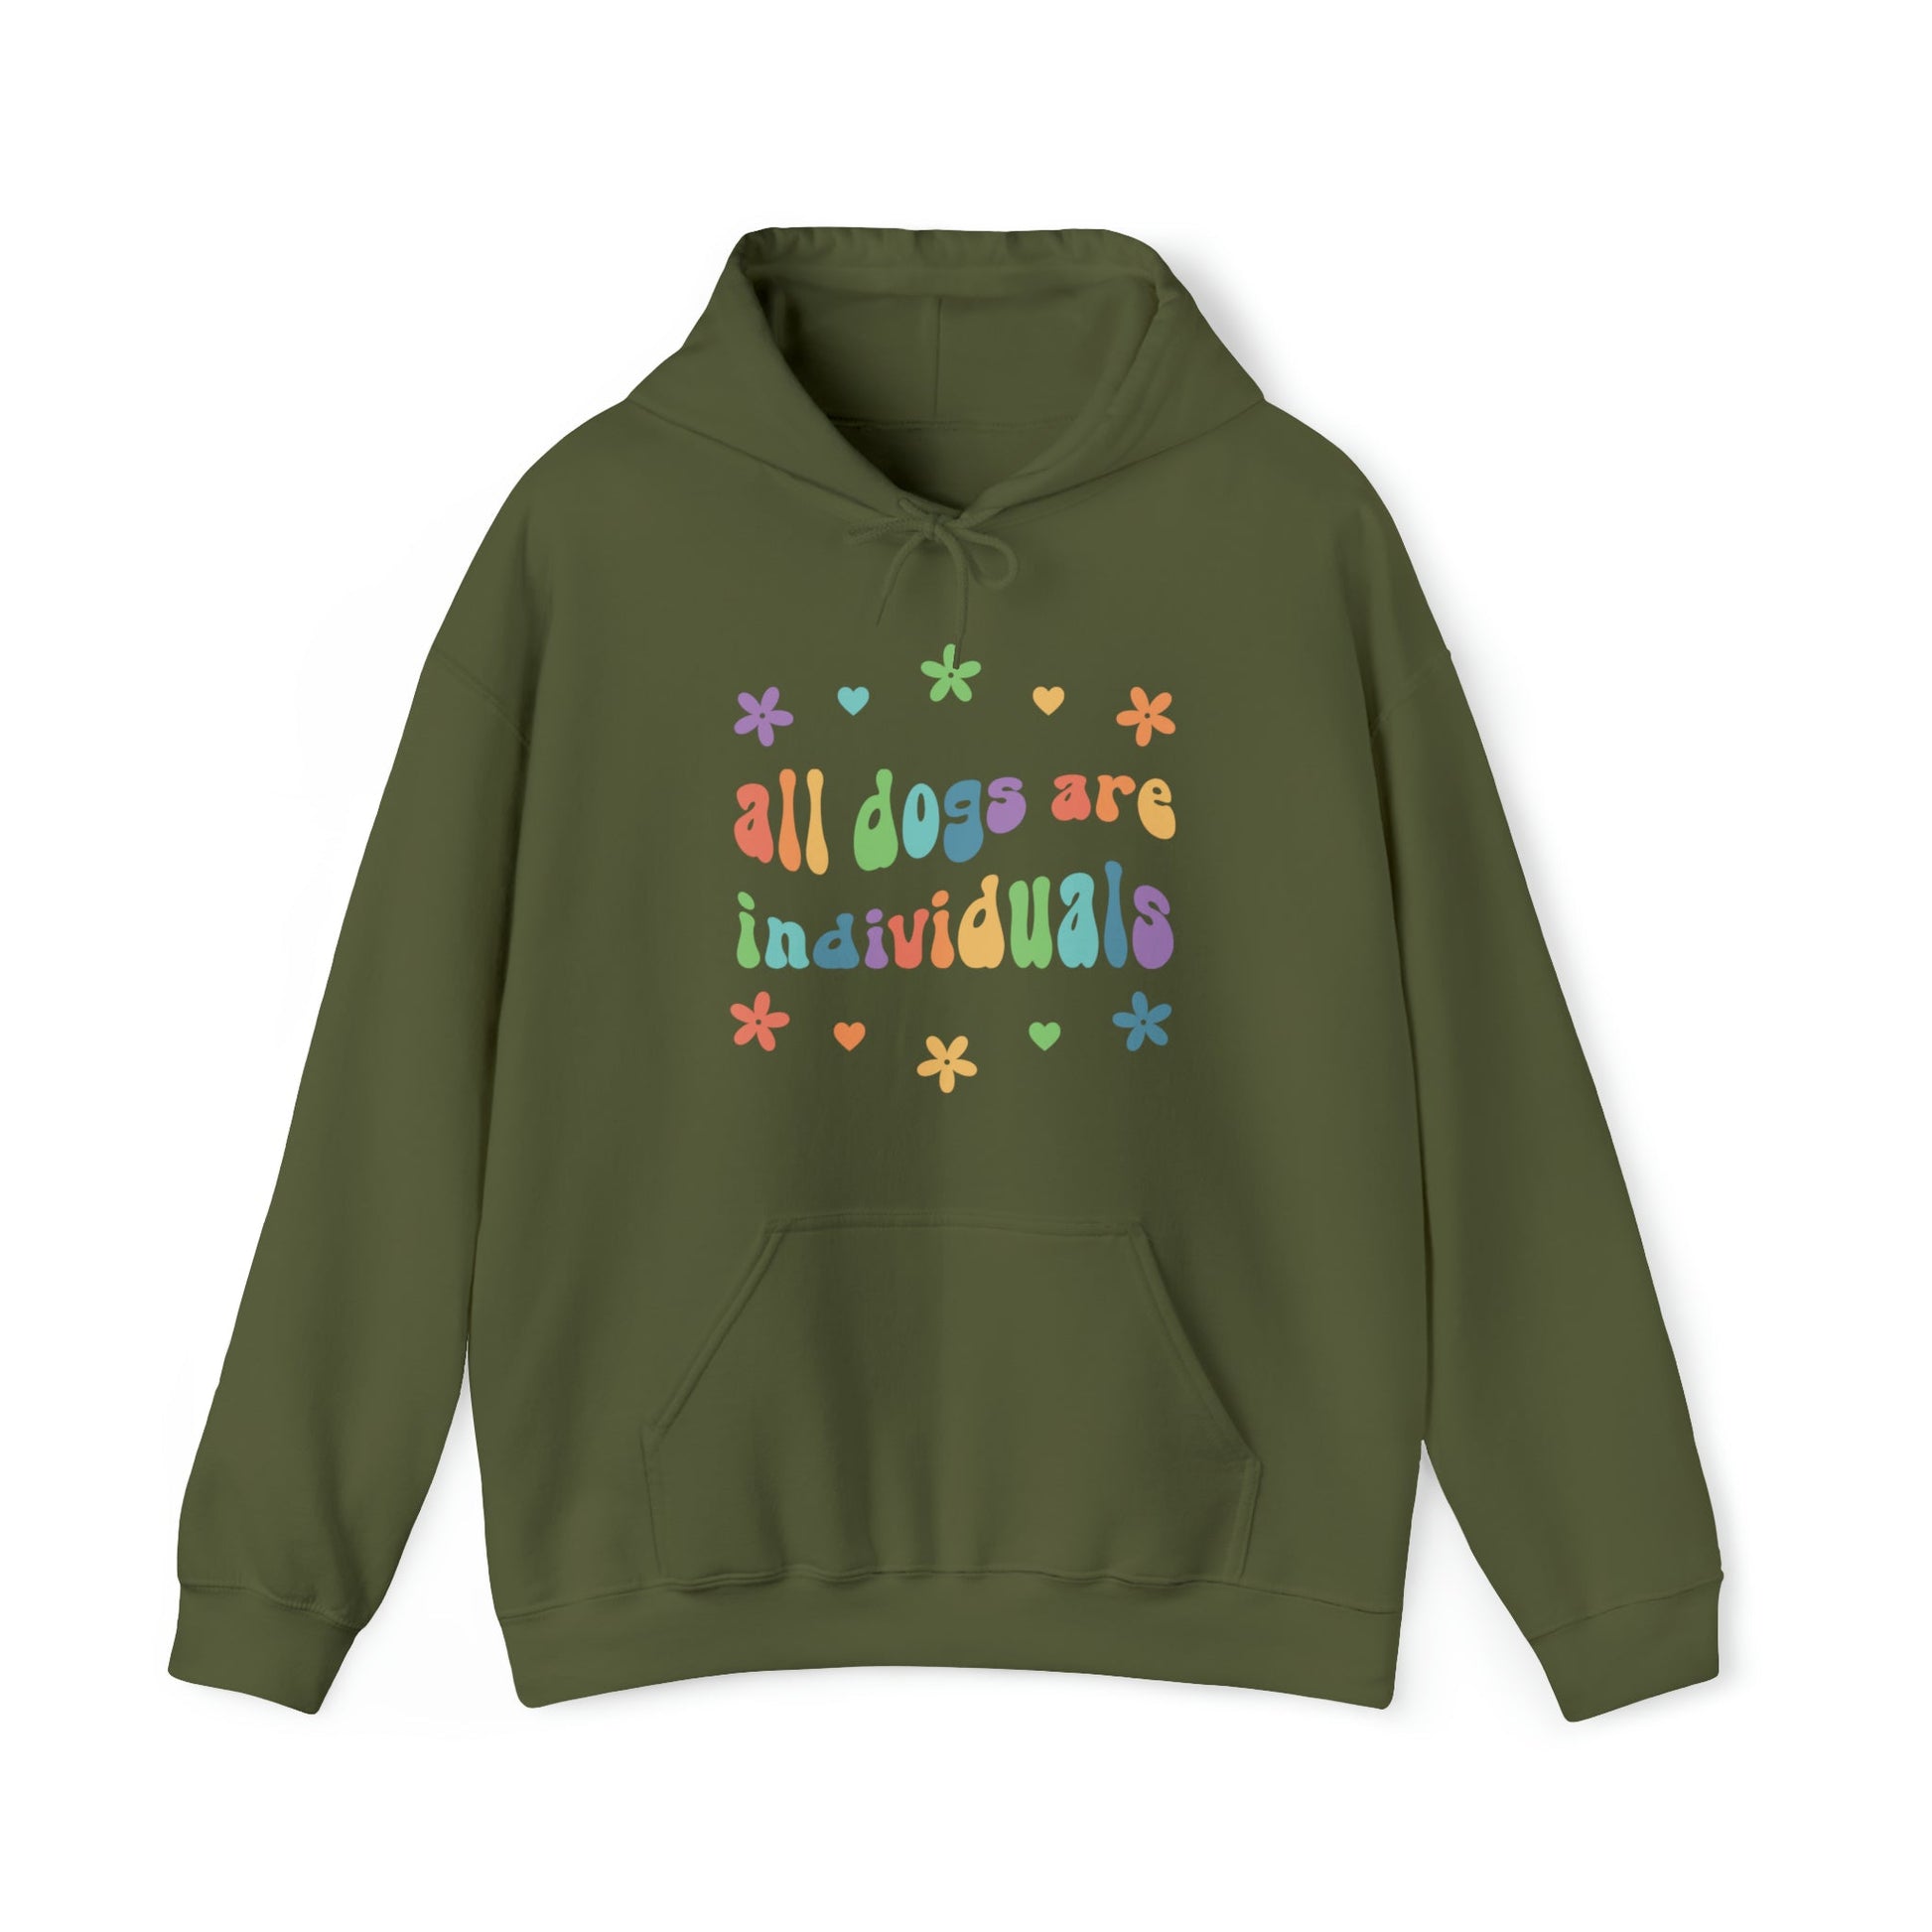 All Dogs are Individuals | Hooded Sweatshirt - Detezi Designs-22624036052468079688